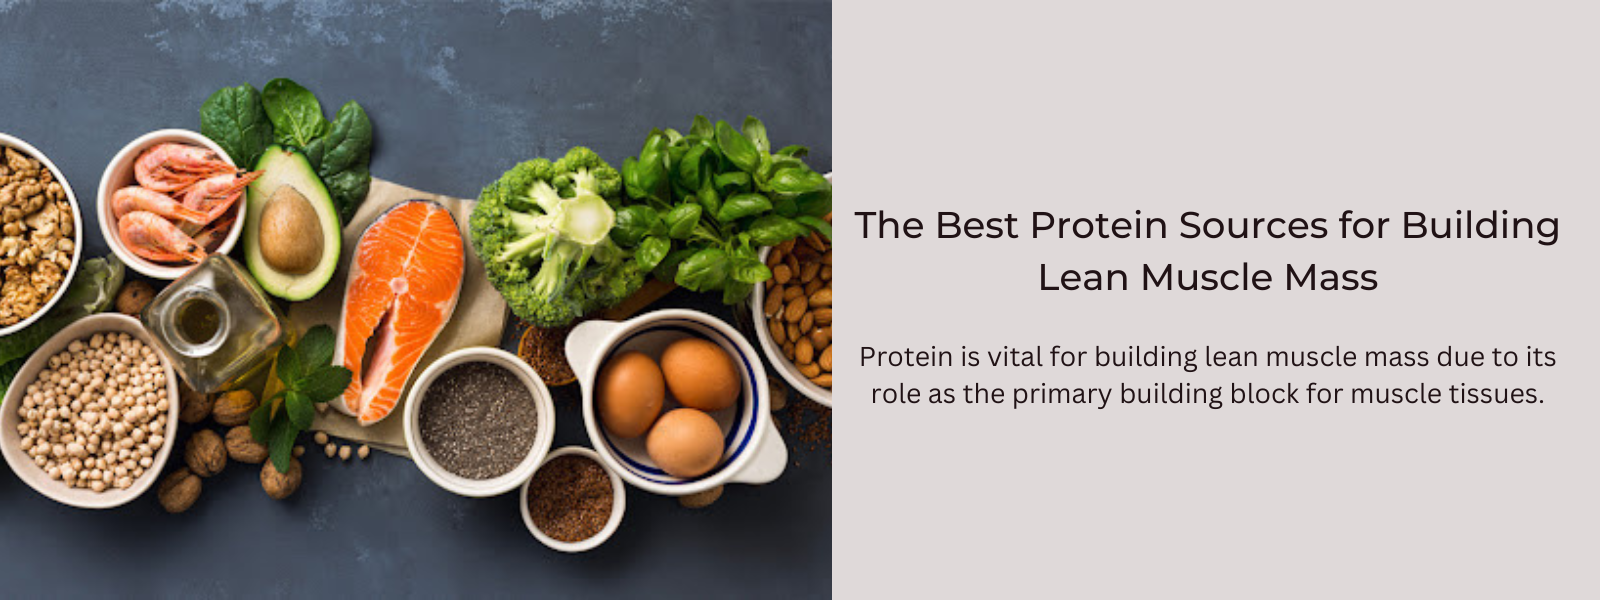 The Best Protein Sources for Building Lean Muscle Mass